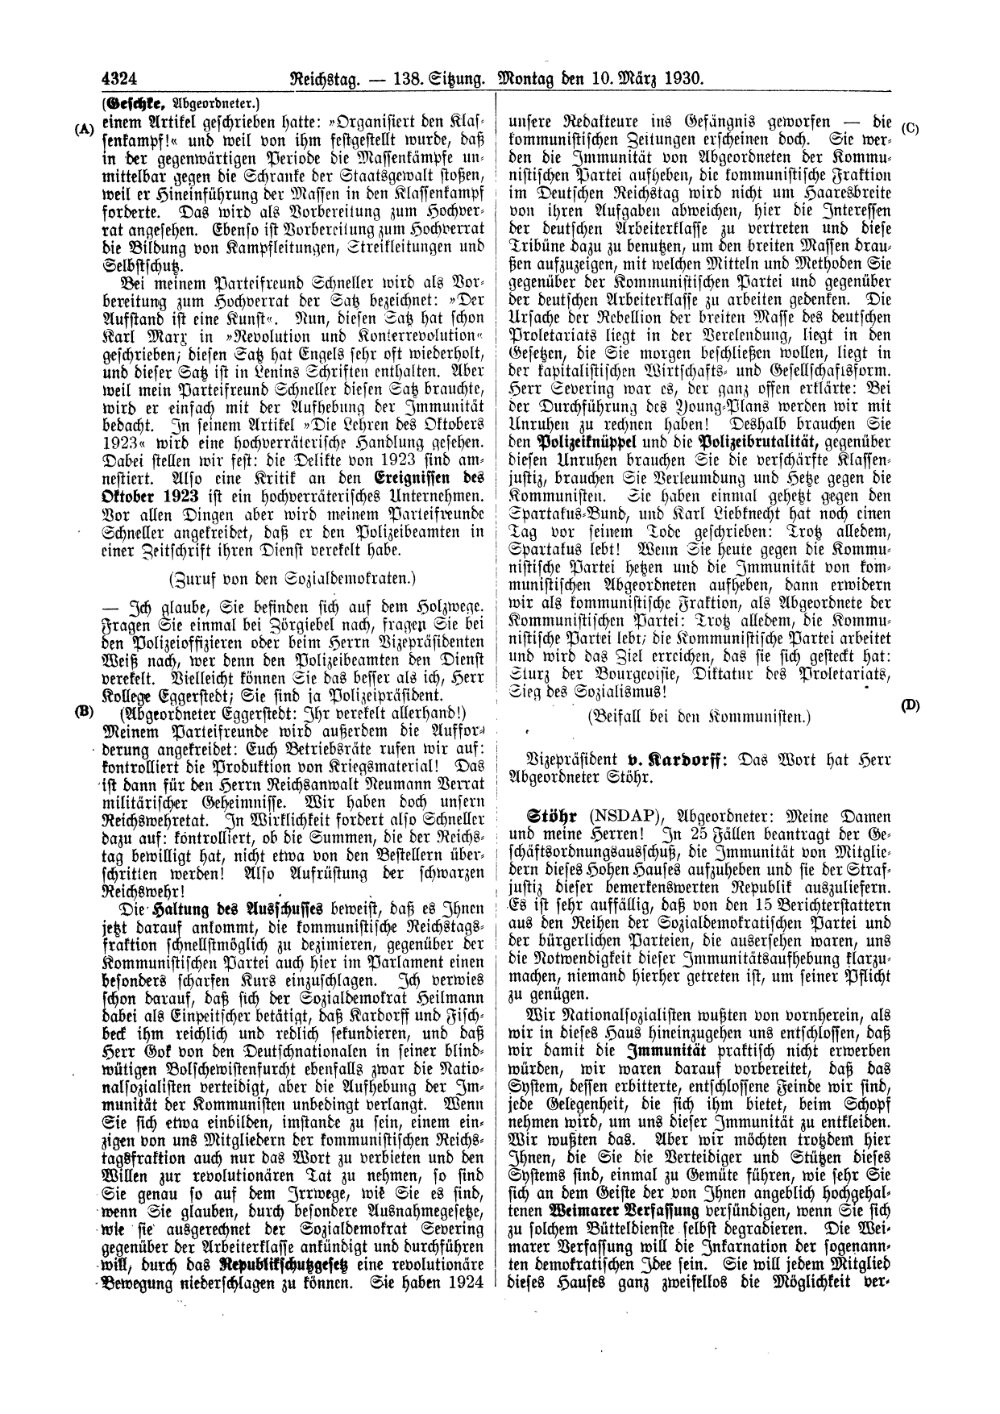 Scan of page 4324